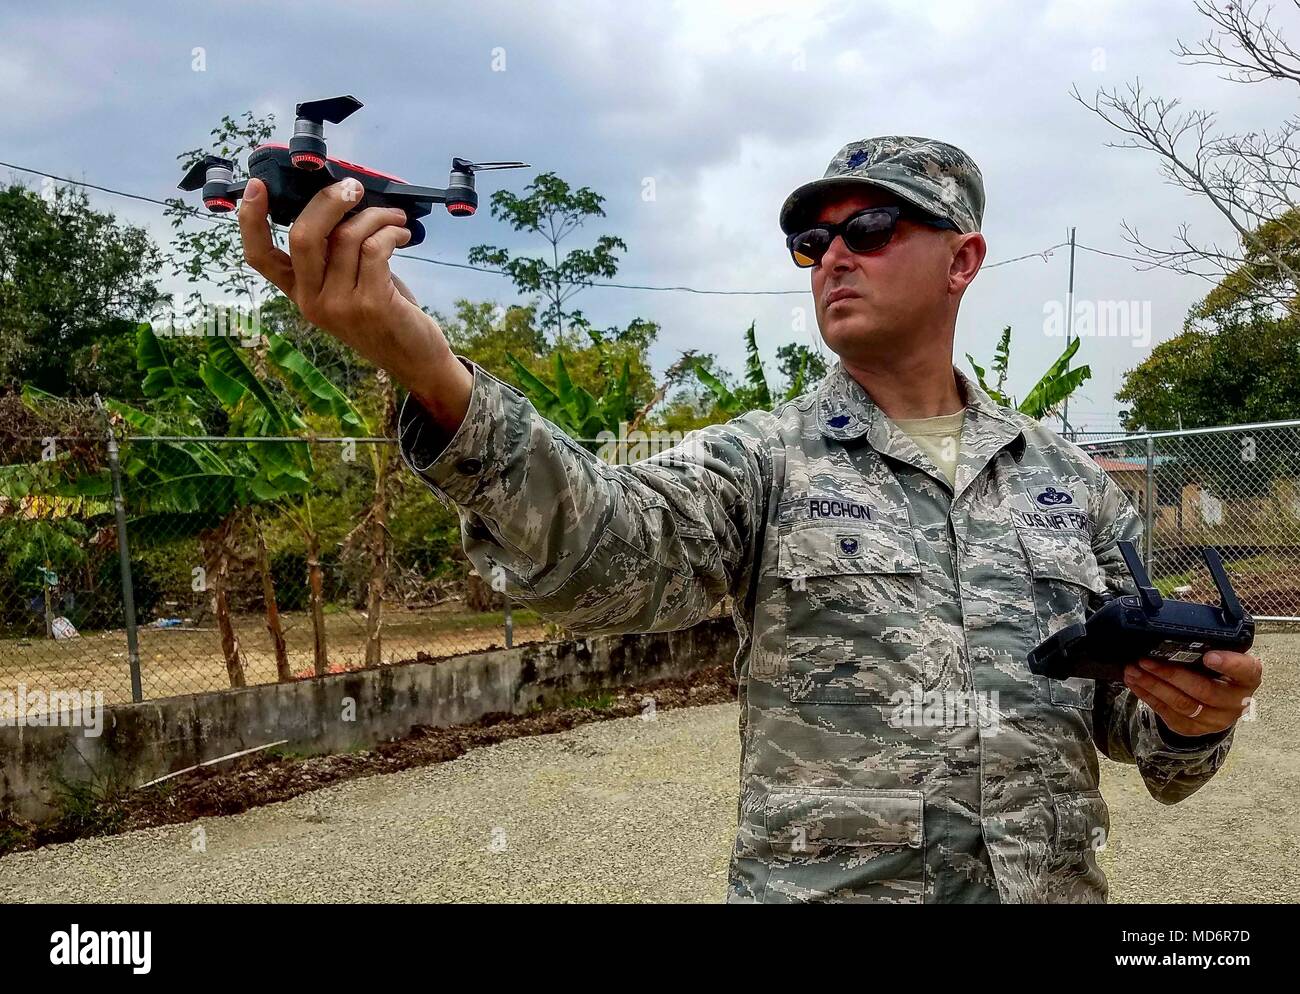 U.S. Air Force Lt. Col. Matthew Rochon, 346th Air Expeditionary Group deputy commander, prepares to operate a small drone to photograph work sites in Meteti, Panama, March 30, 2018. As construction projects continue, photographs will help document the work being done. Exercise New Horizons is a joint training exercise where all branches of the U.S. military conduct training in civil engineer, medical and support services while benefiting the local community. (U.S. Air Force photo by Senior Airman Dustin Mullen/Released) Stock Photo